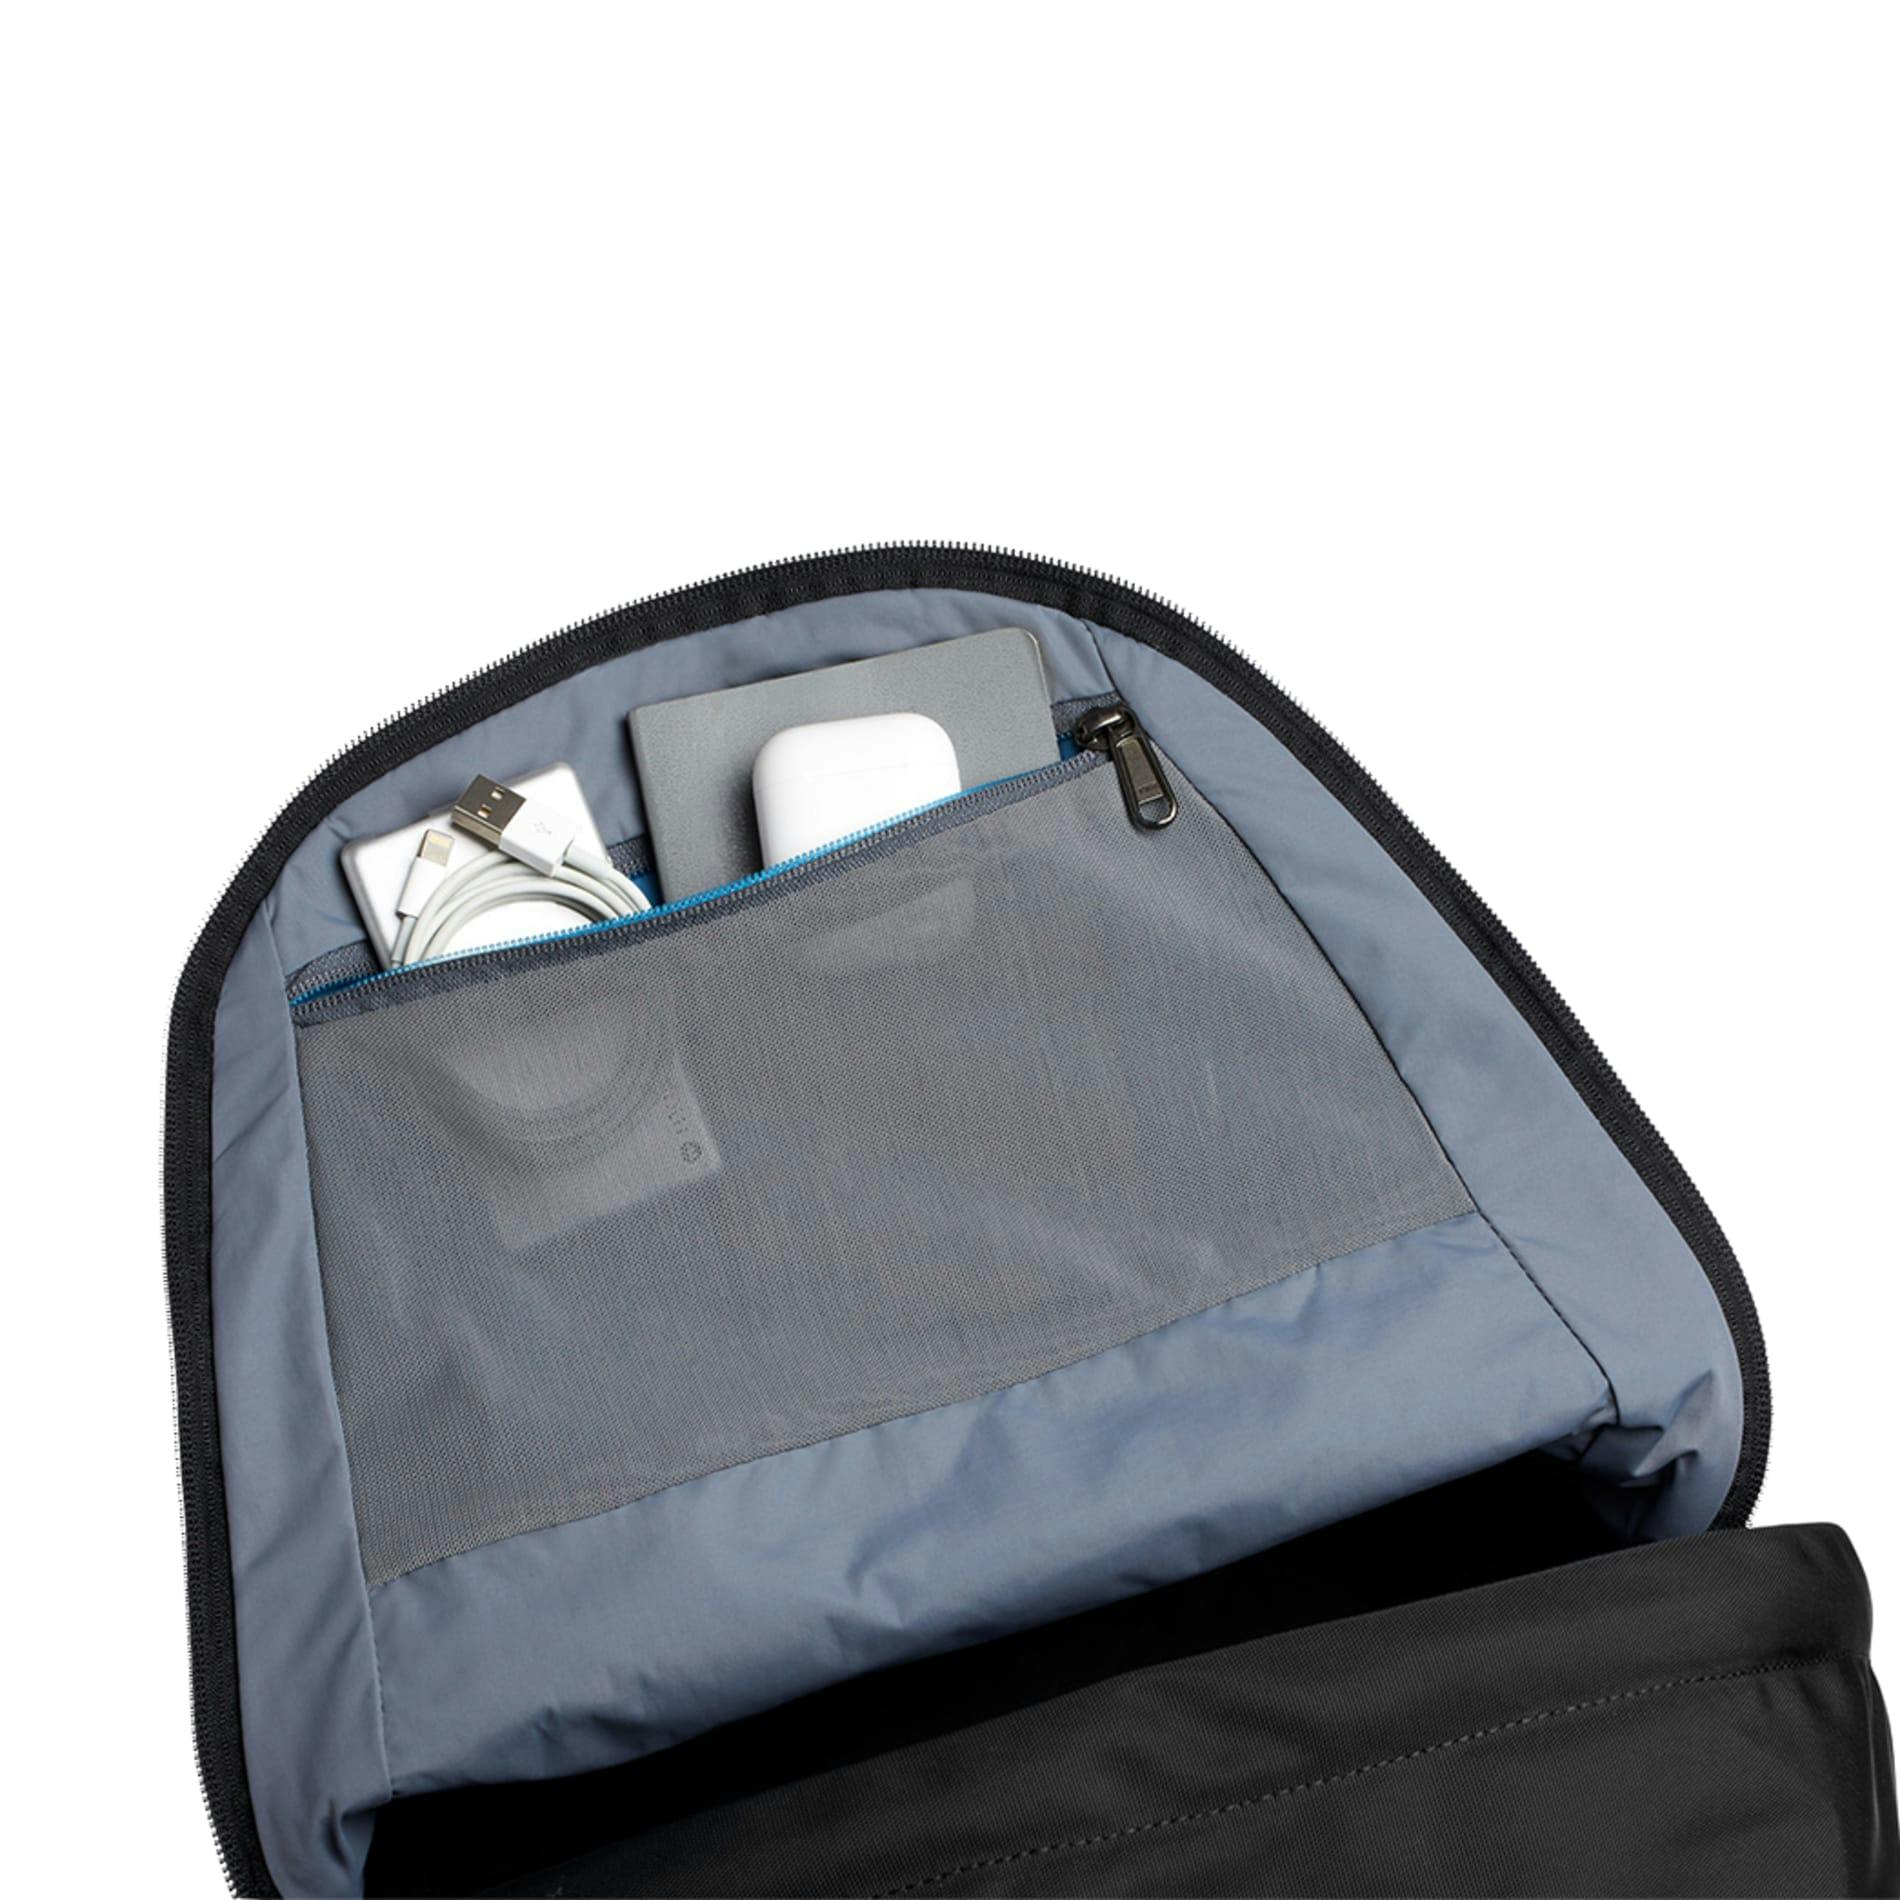 Bellroy Classic 16" Computer Backpack - additional Image 6